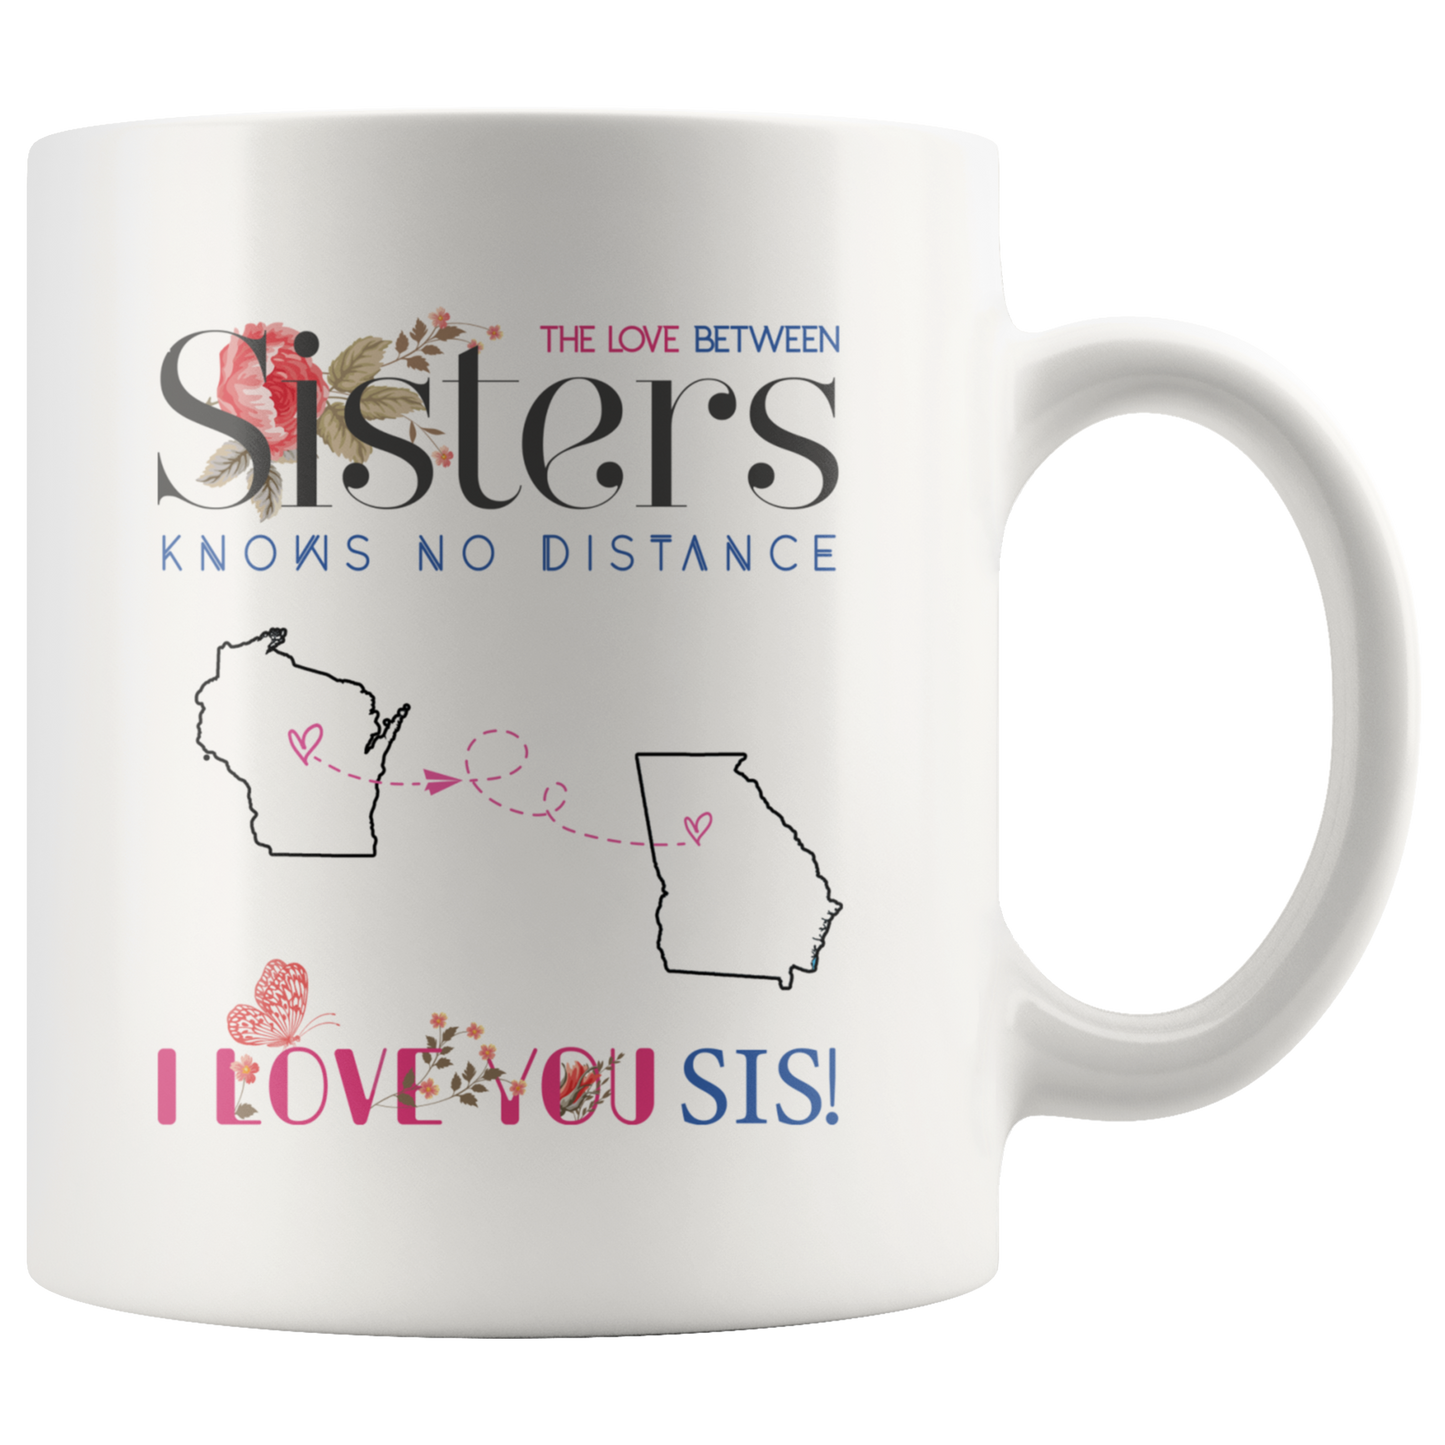 M-20520492-sp-23449 - Long Distance Relationship Gift - The Love Between Sisters K